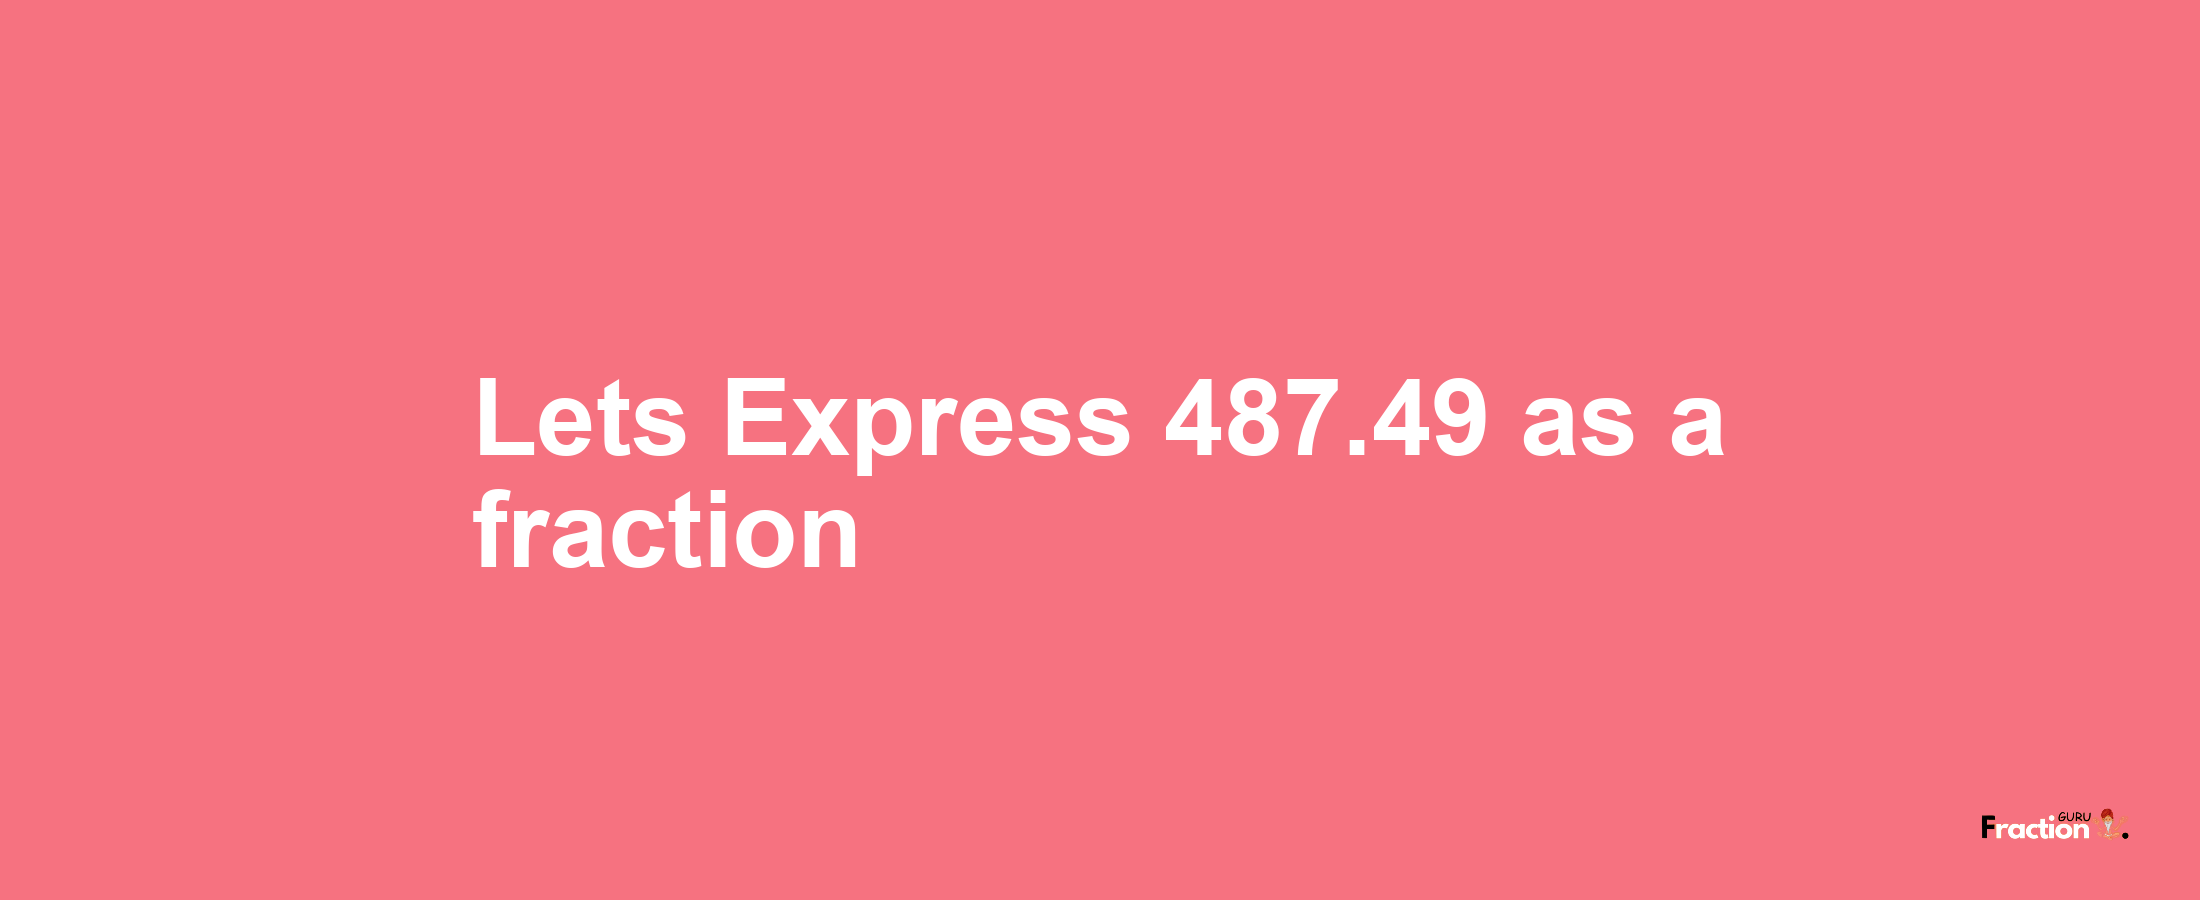 Lets Express 487.49 as afraction